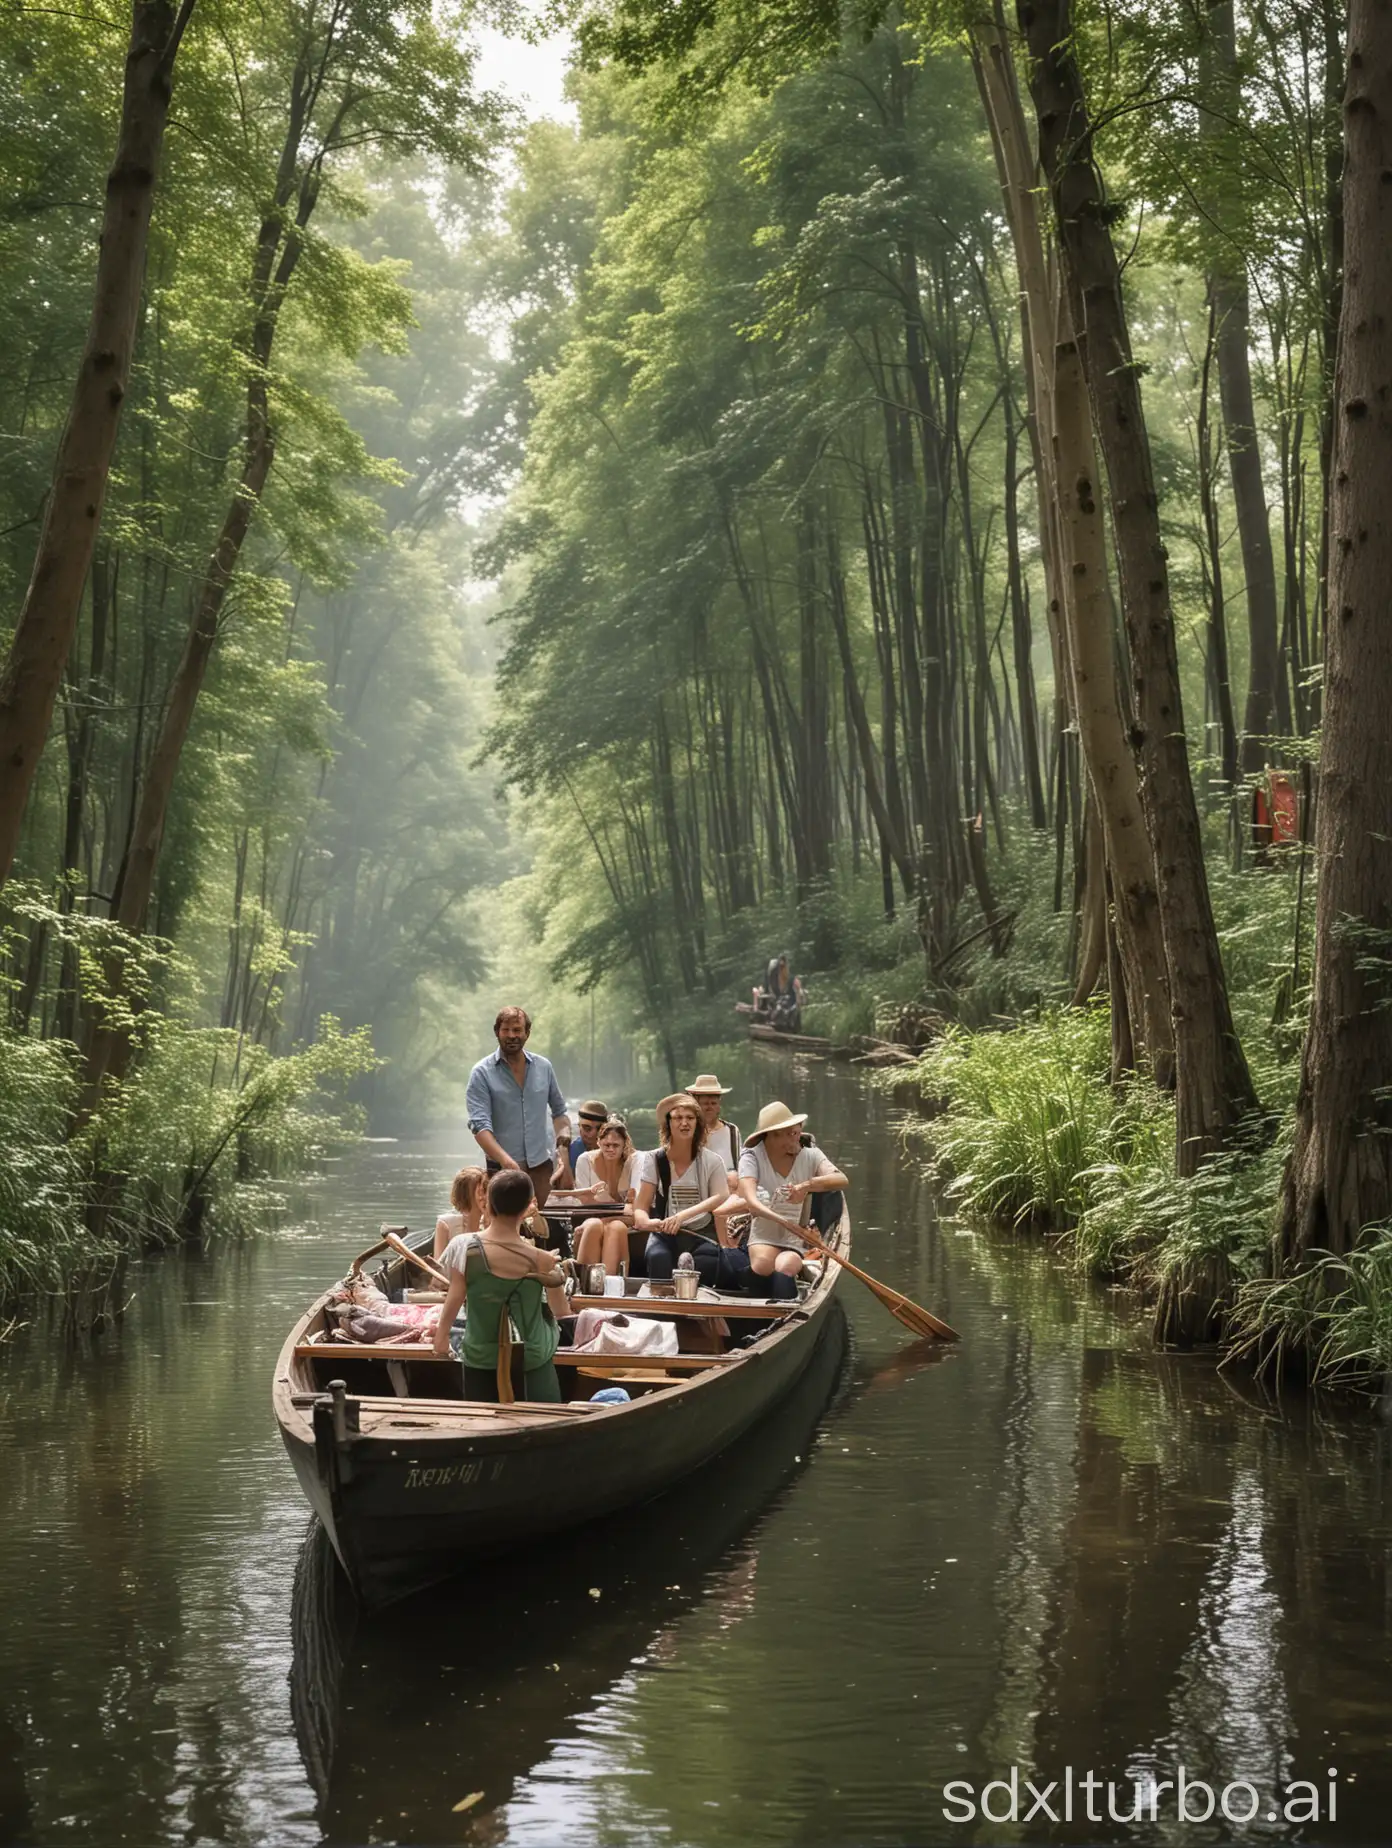 Punt-Ride-and-Grilling-Adventure-in-Spreewald-Explore-Nature-and-Enjoy-Outdoor-Cooking